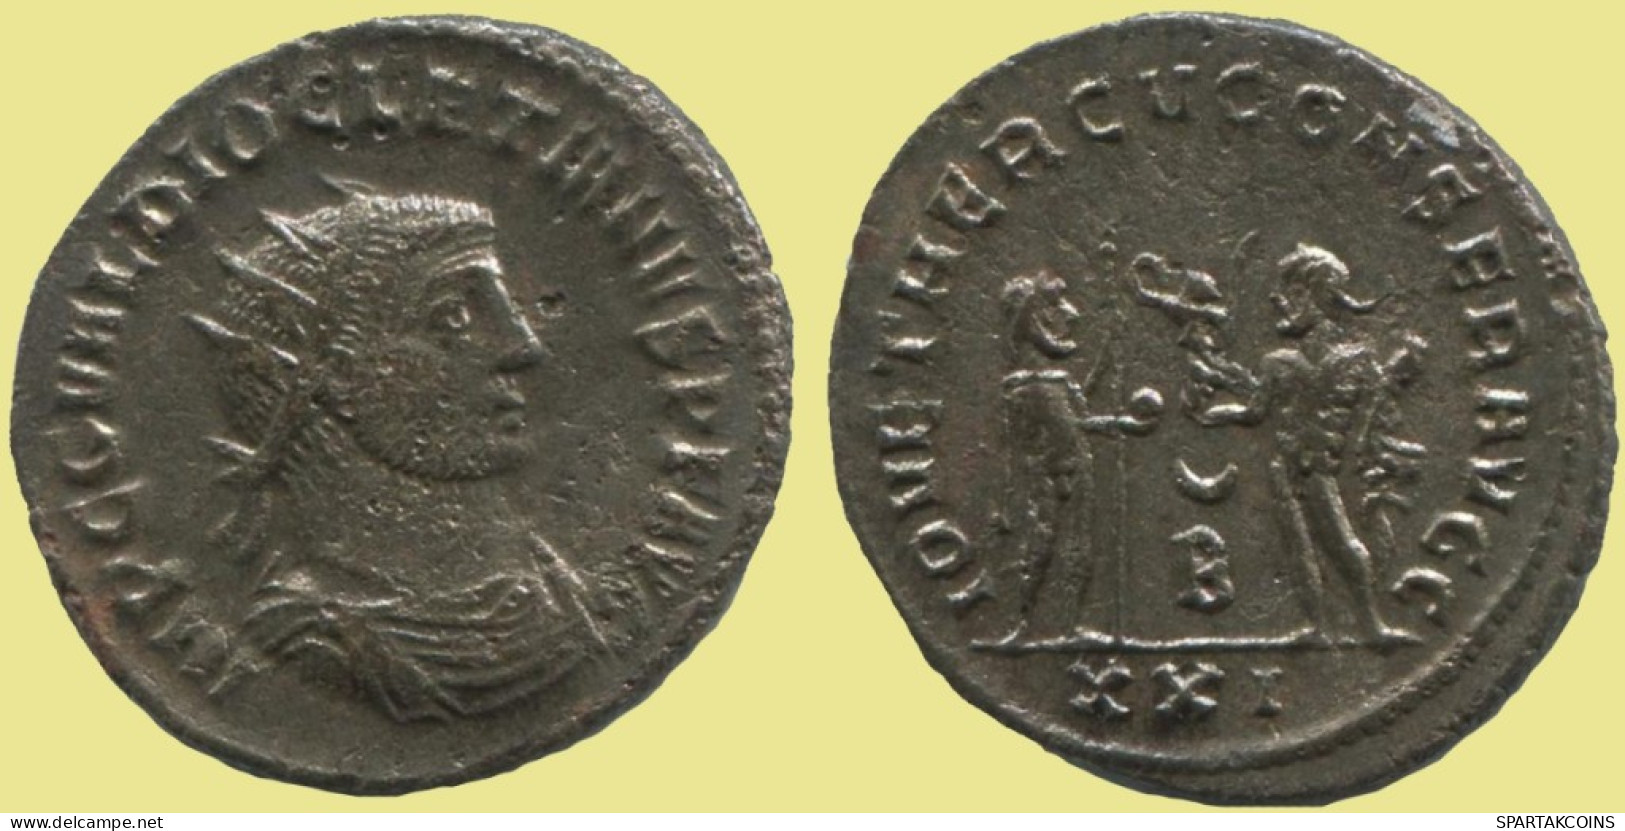 DIOCLETIAN ANTONINIANUS Antioch (? B/XXI) AD293 IOVETHERCVCONSER. #ANT1869.48.U.A - The Tetrarchy (284 AD To 307 AD)